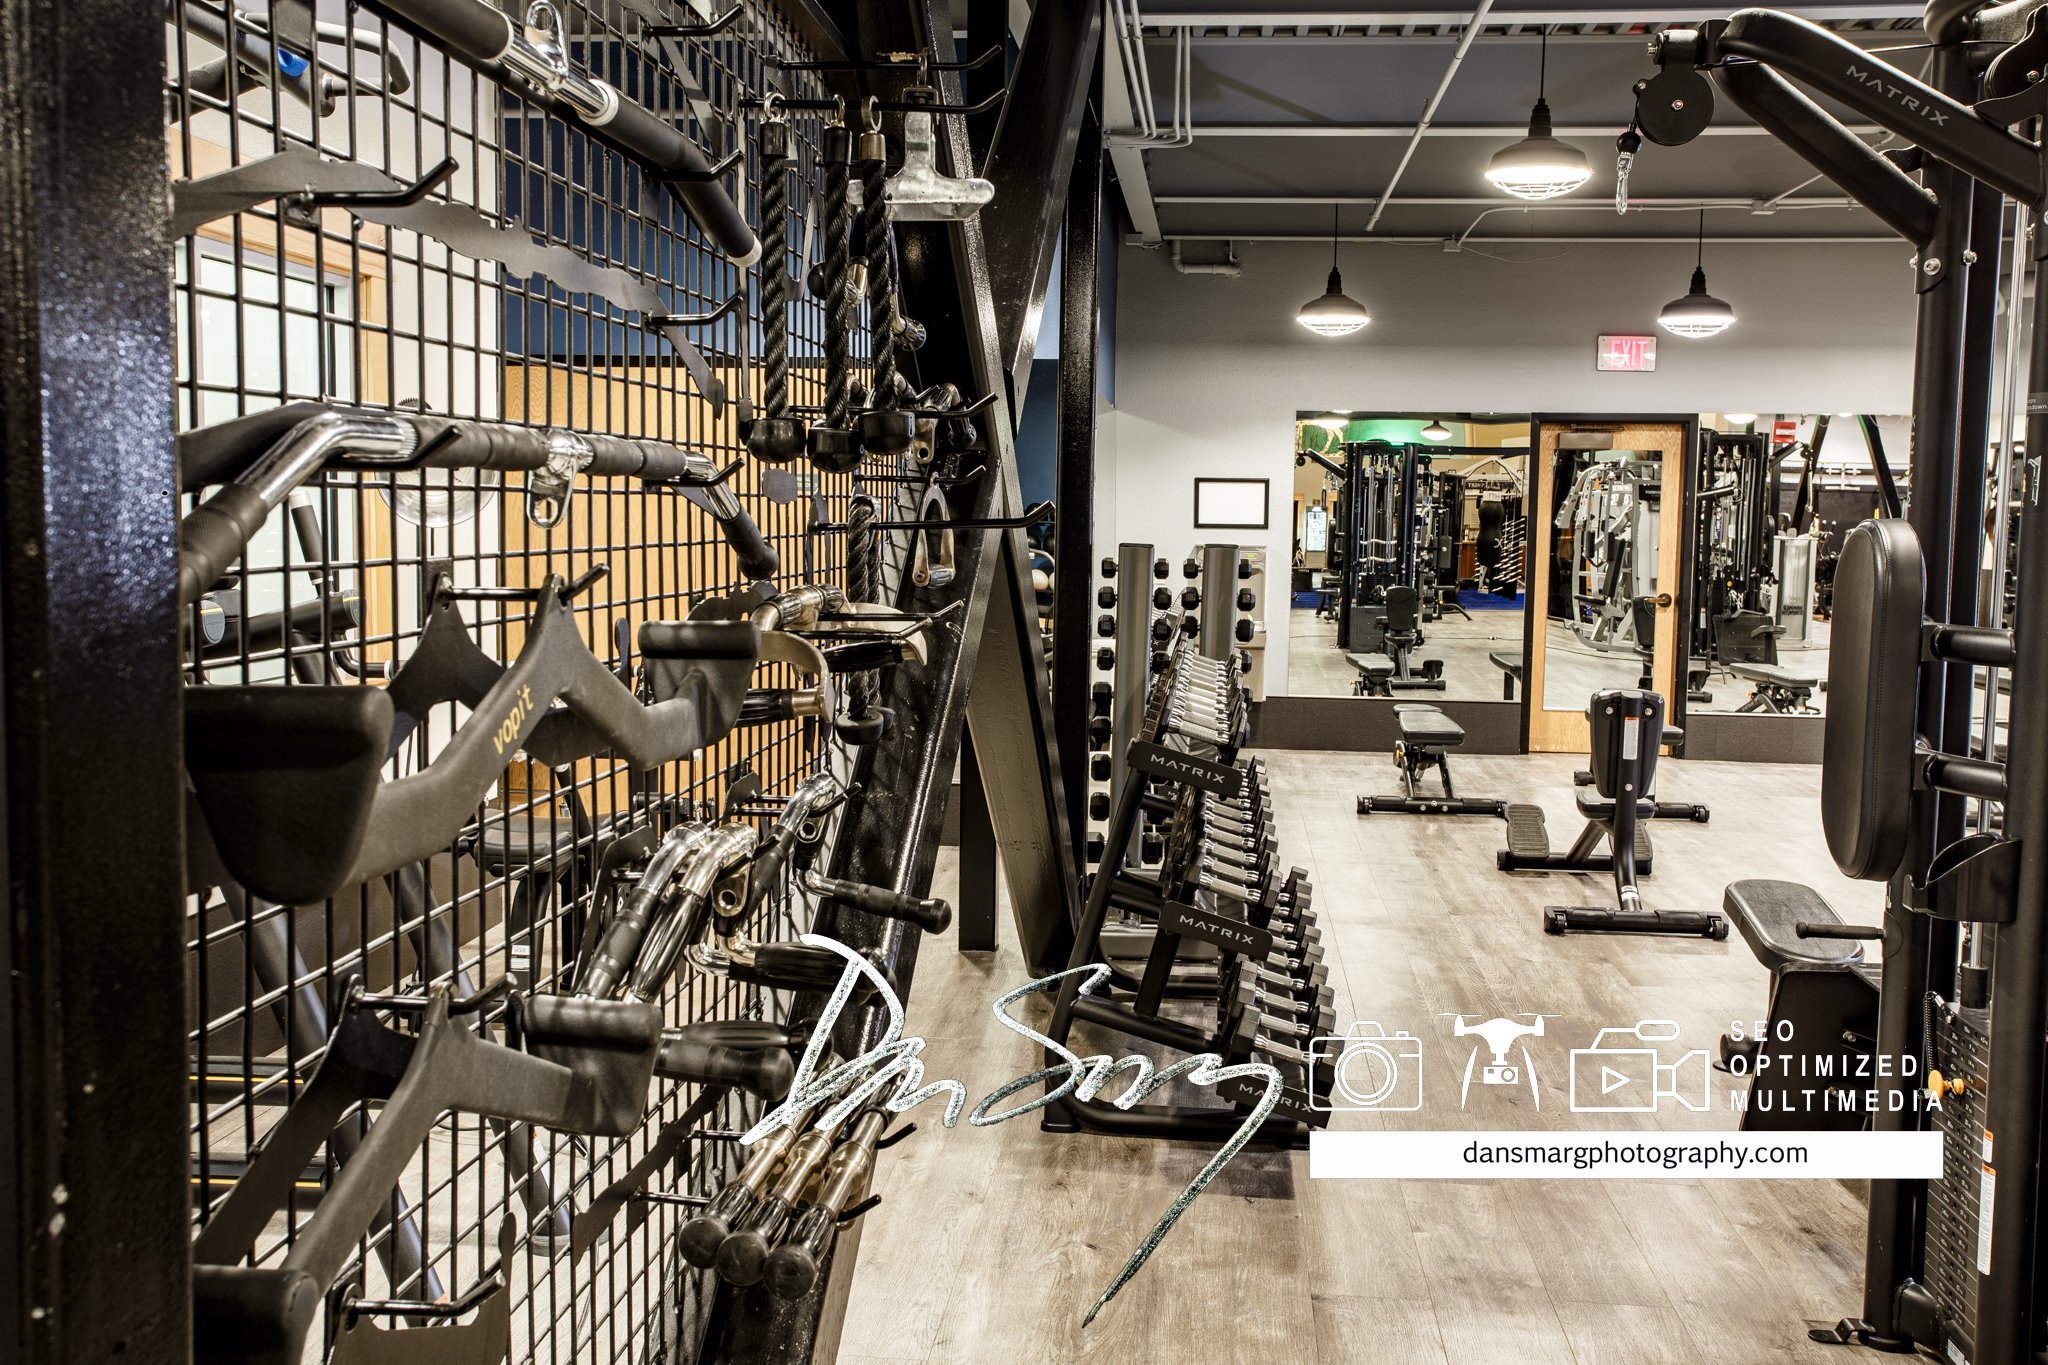 DanSmargPhotography.com-SEO-Optimmized-Multimedia-Content-The-Wave-Fitness-Center-Whitefish-Montana-22.jpg